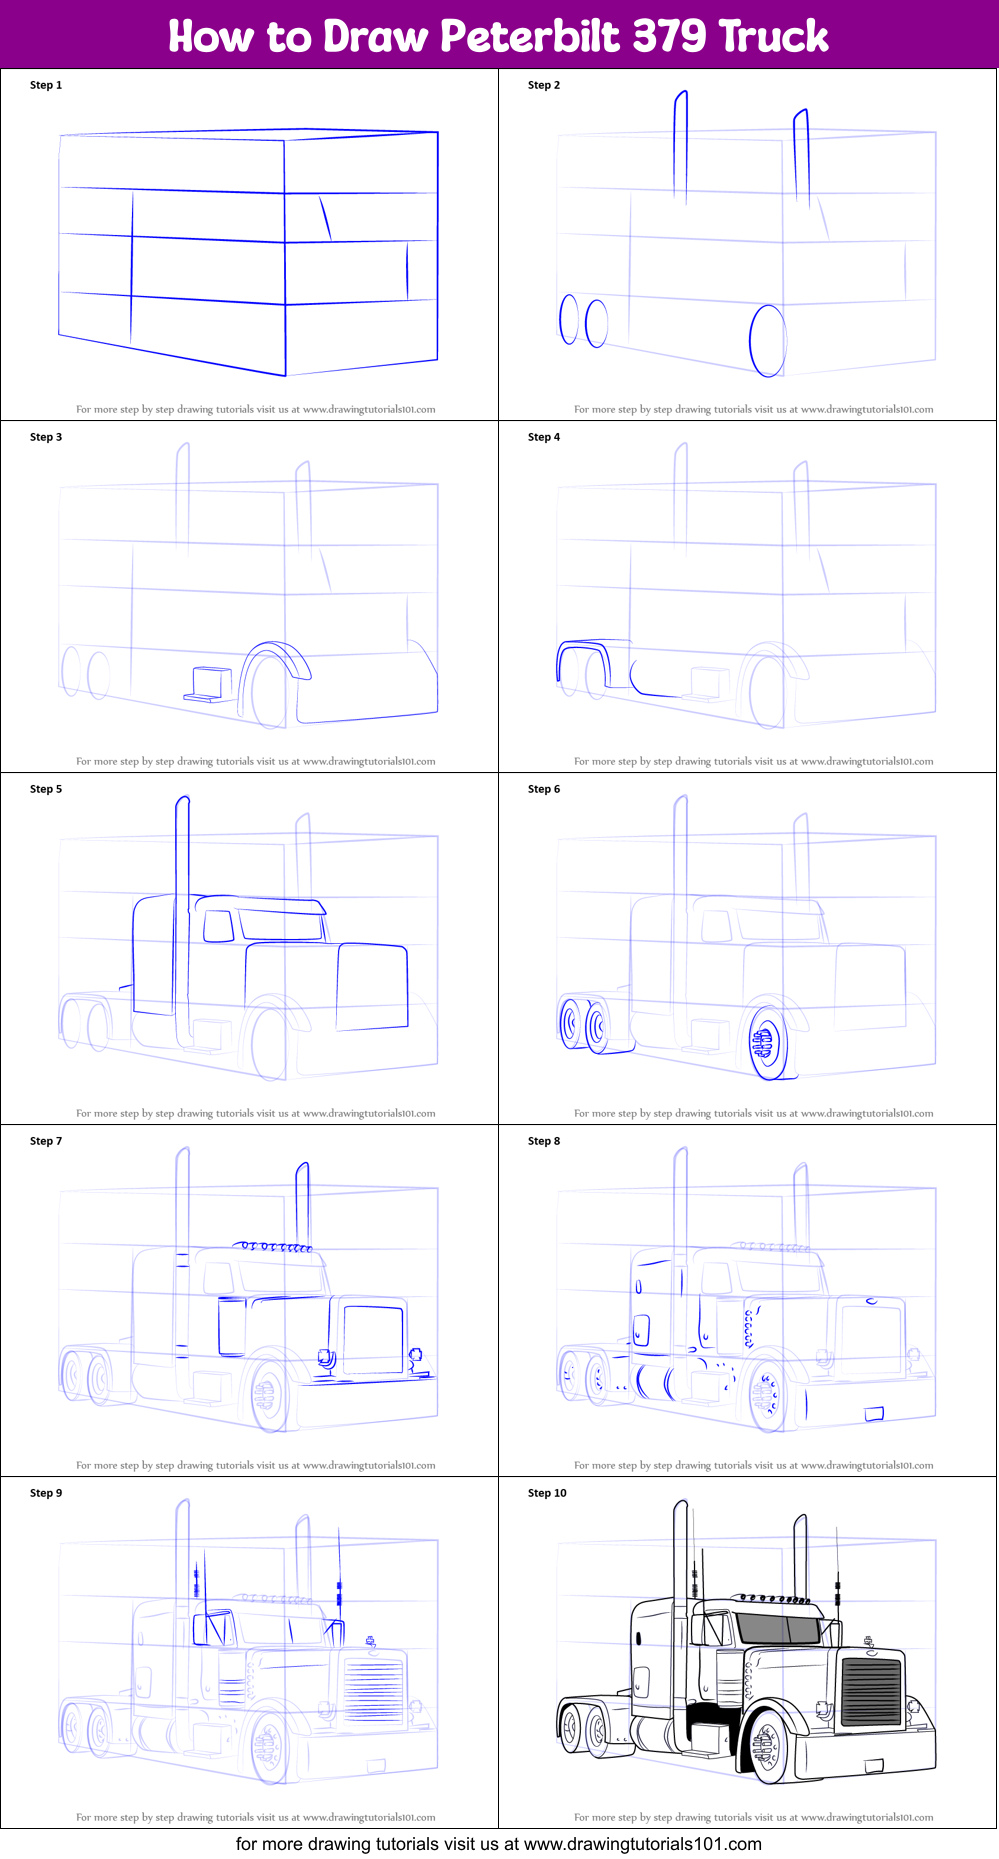 How to Draw Peterbilt 379 Truck printable step by step drawing sheet